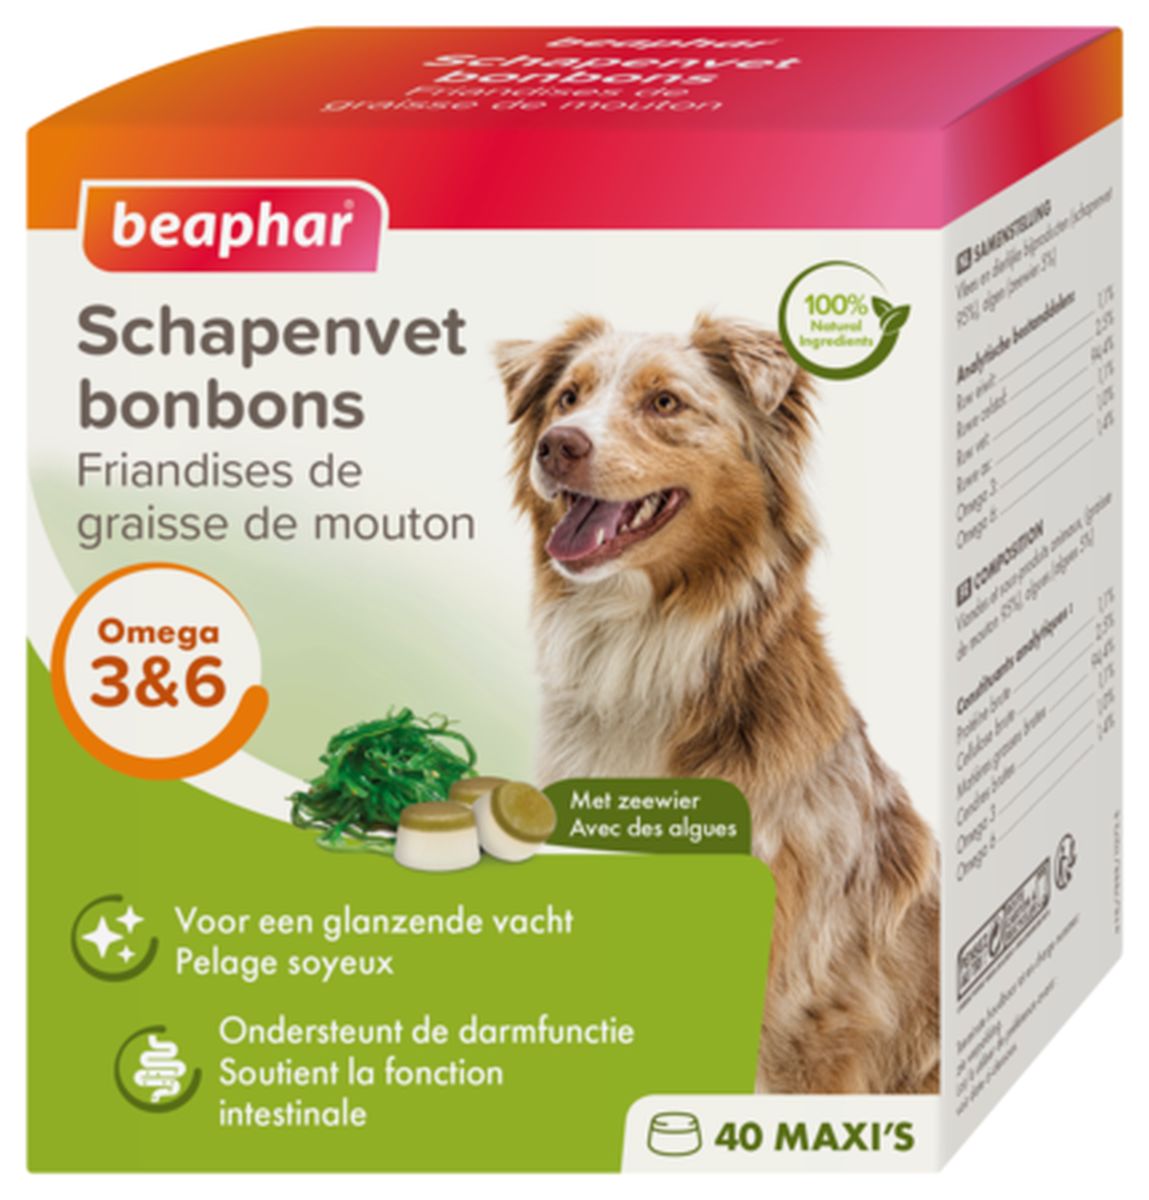 Beaphar Sheep Fat Bonbons. Rich in vitamins, minerals and trace elements, for skin & coat